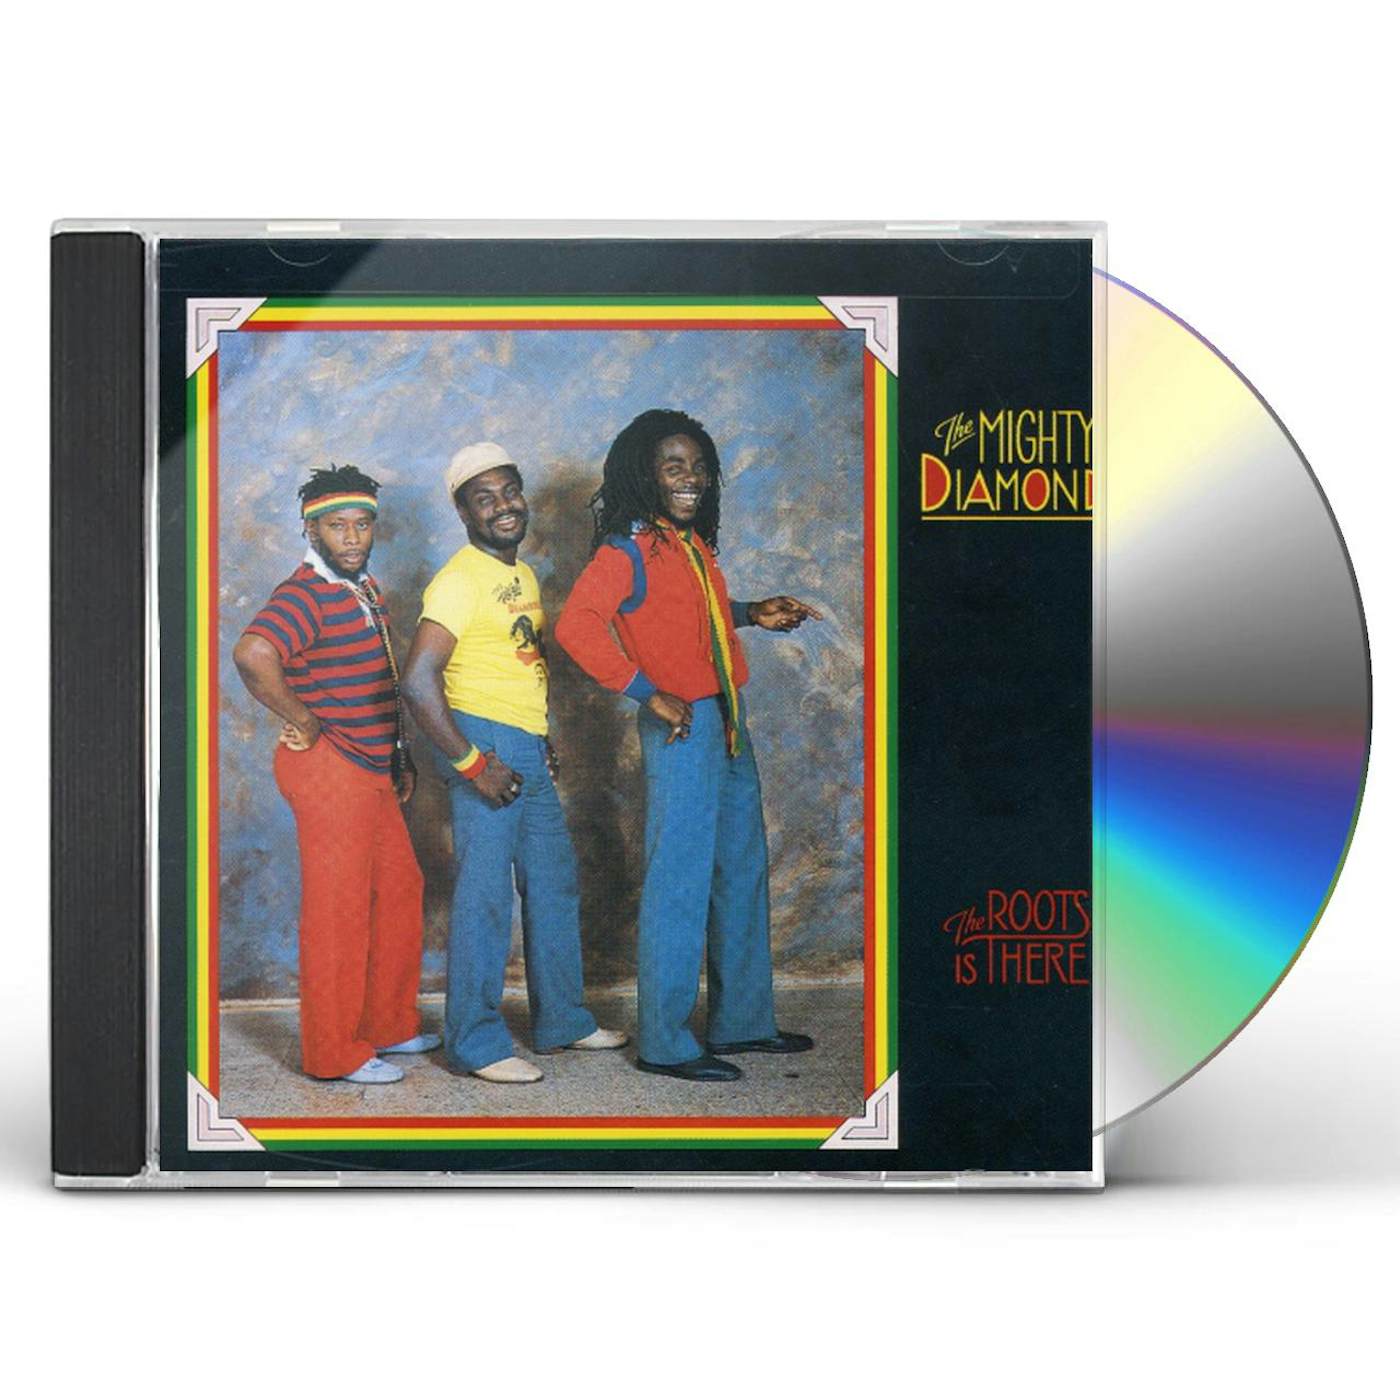 Mighty Diamonds ROOTS IS THERE CD